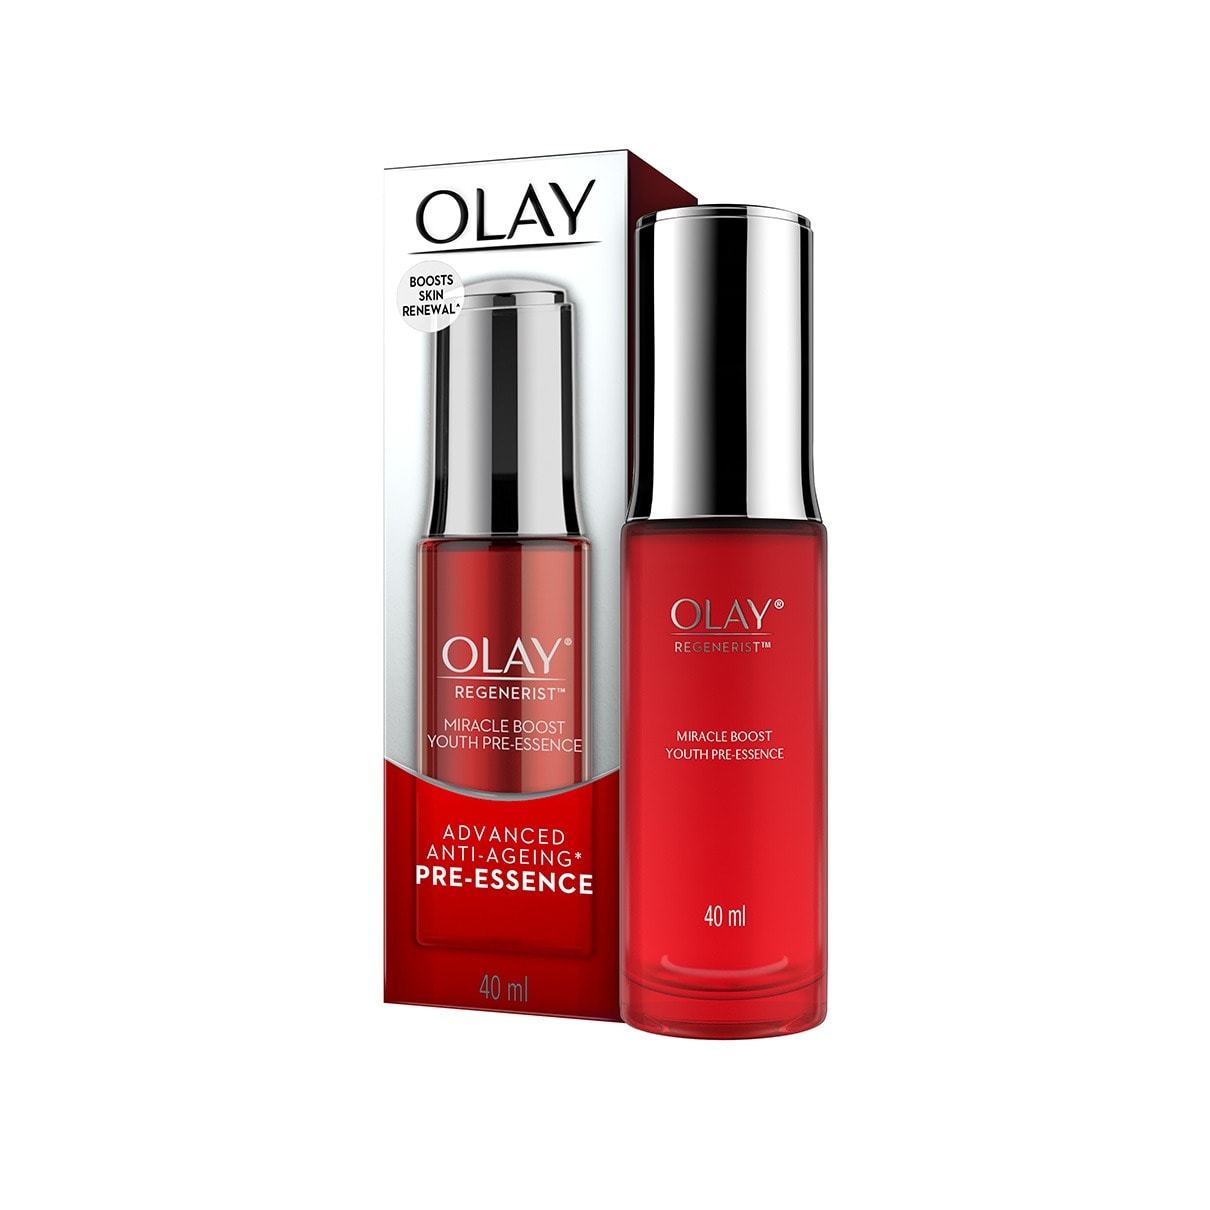 OLAY REGENERIST MIRACLE BOOST YOUTH  PRE-ESSENCE ANTI-AGEING SKIN 40ml EXP 2023 - $43.99